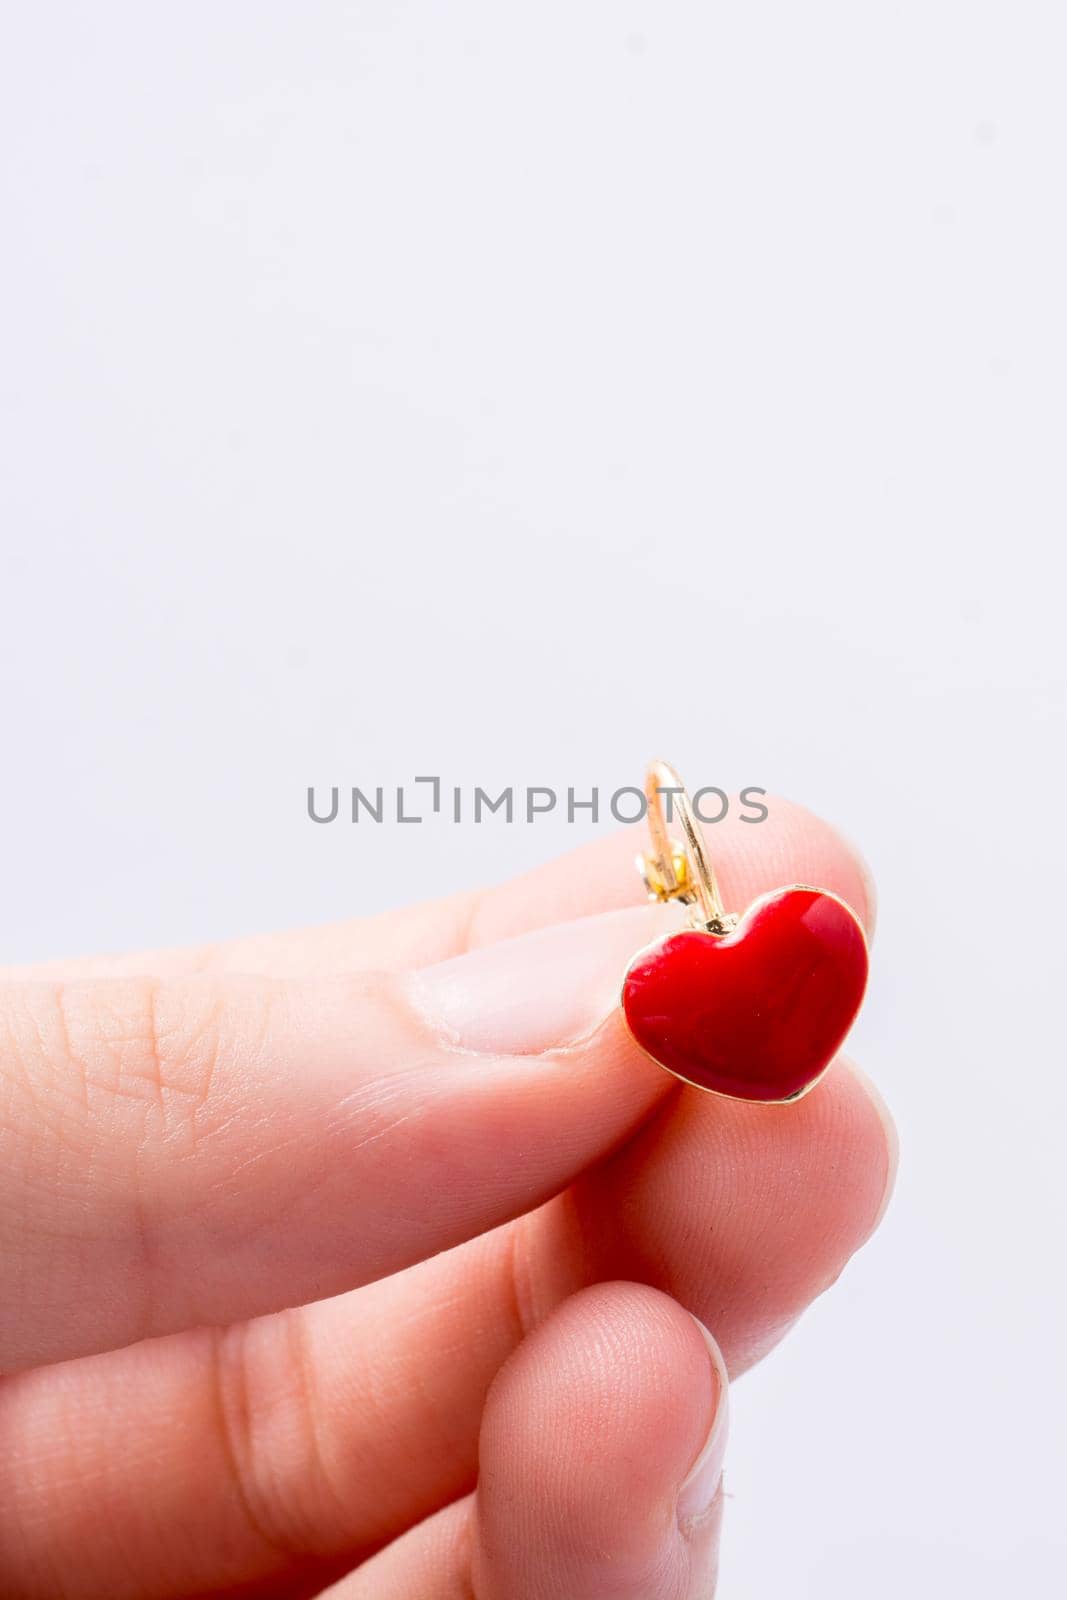 Red color heart shape earring in hand on white